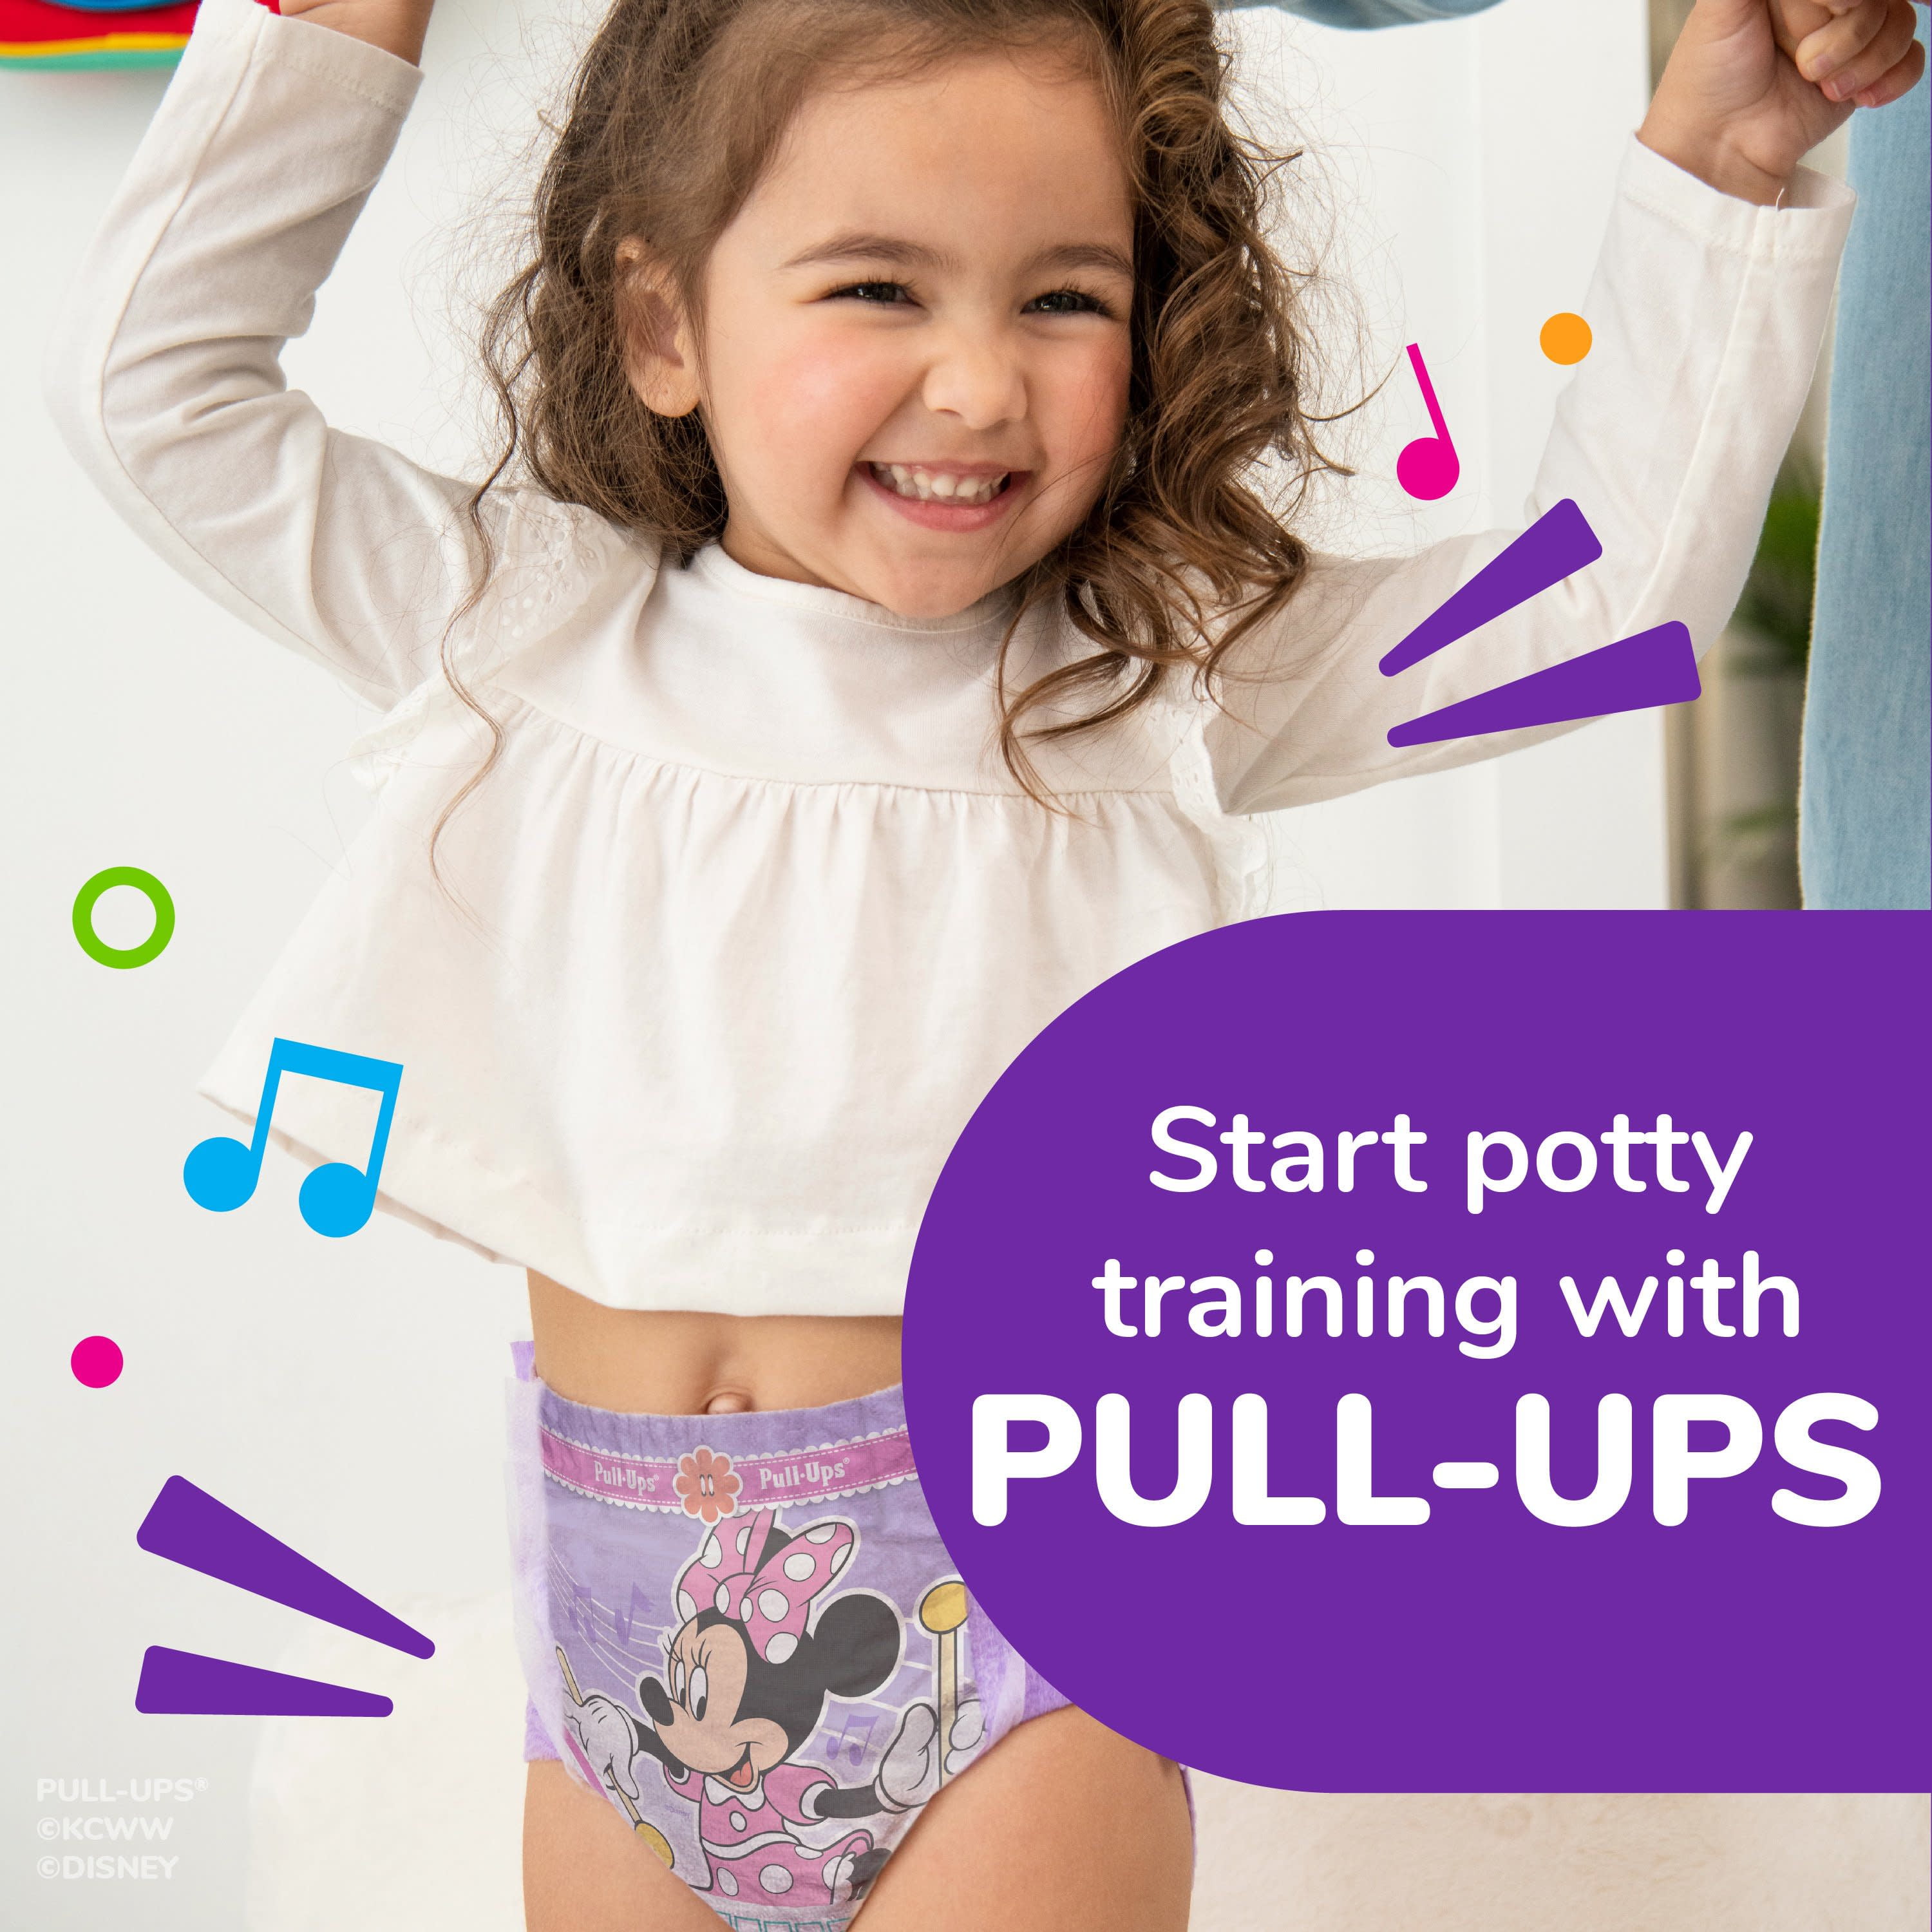 Pull-Ups Night-Time Girls' Training Pants, 3T-4T, 60 Ct 3T-4T (60 Count)